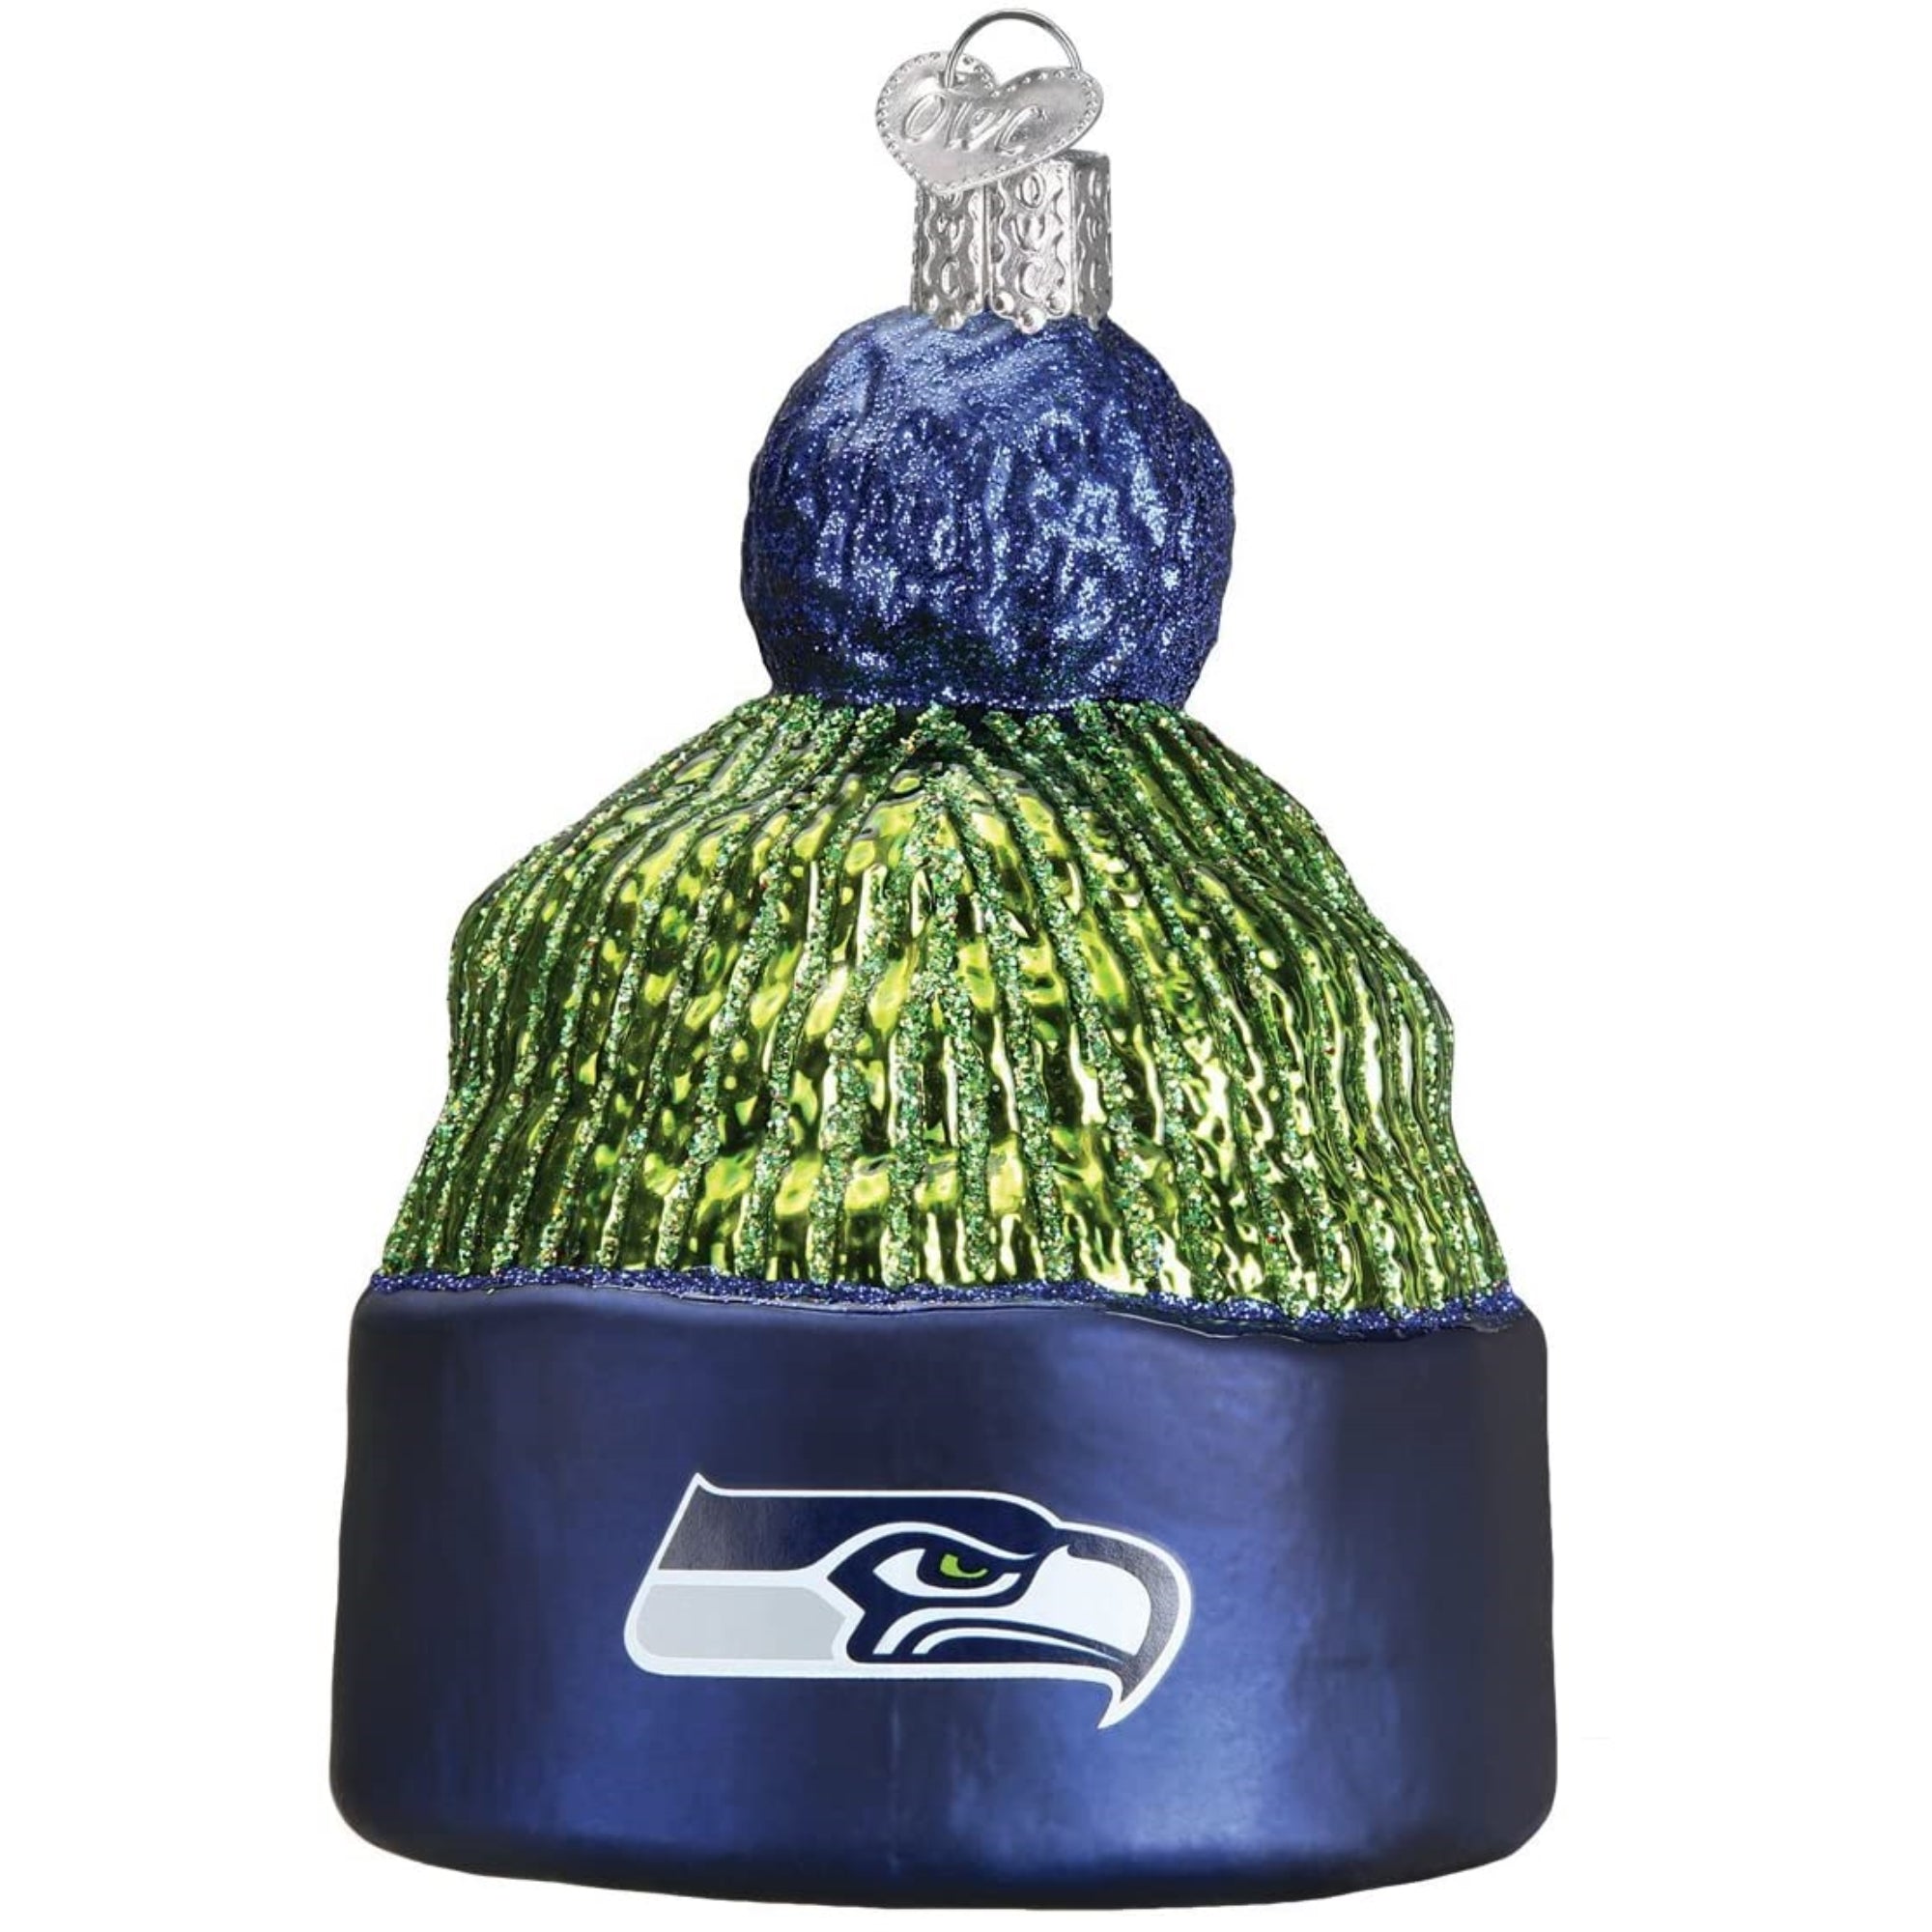 Old World Christmas Seattle Seahawks Beanie Ornament For Christmas Tree